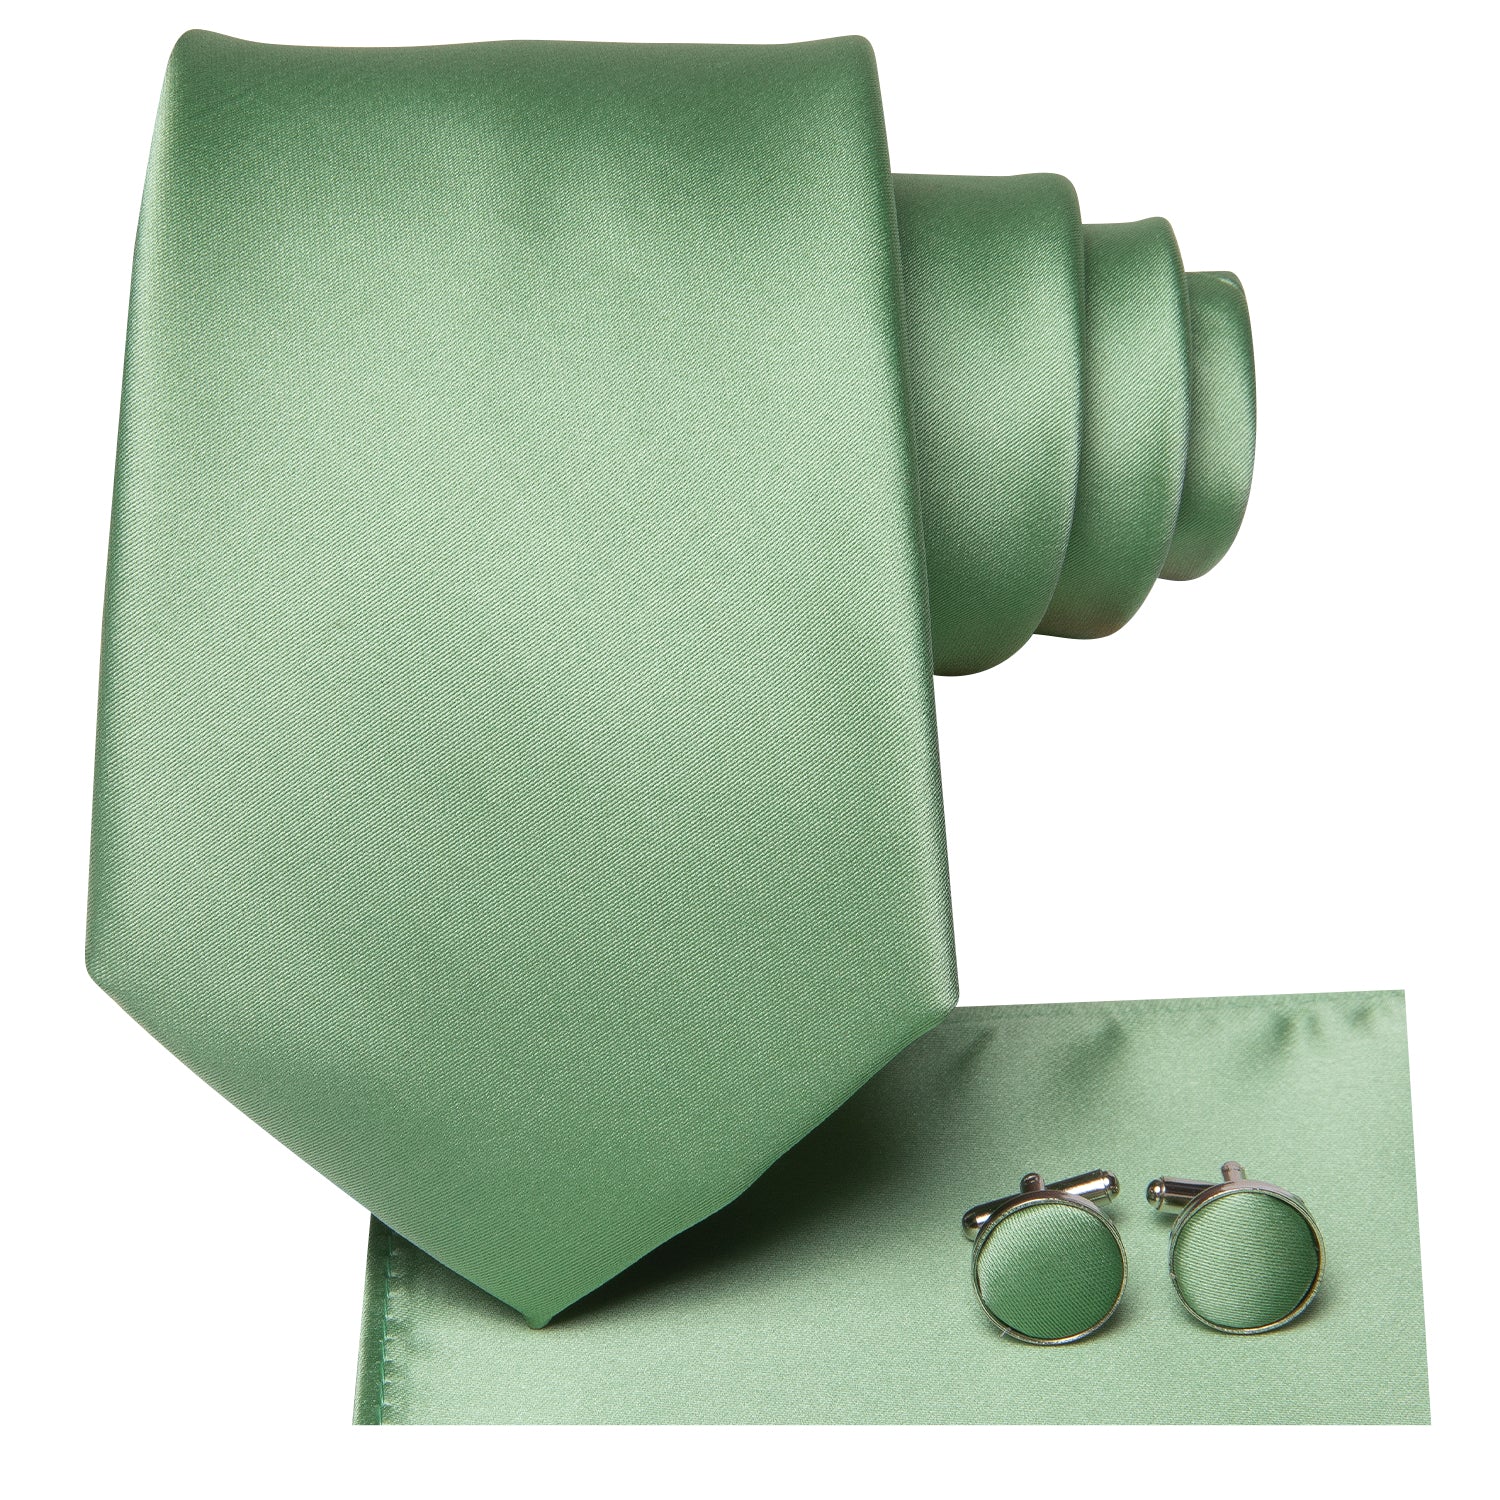 Cyan Solid 70 Inches Extra Long Tie Pocket Square Cufflinks Set